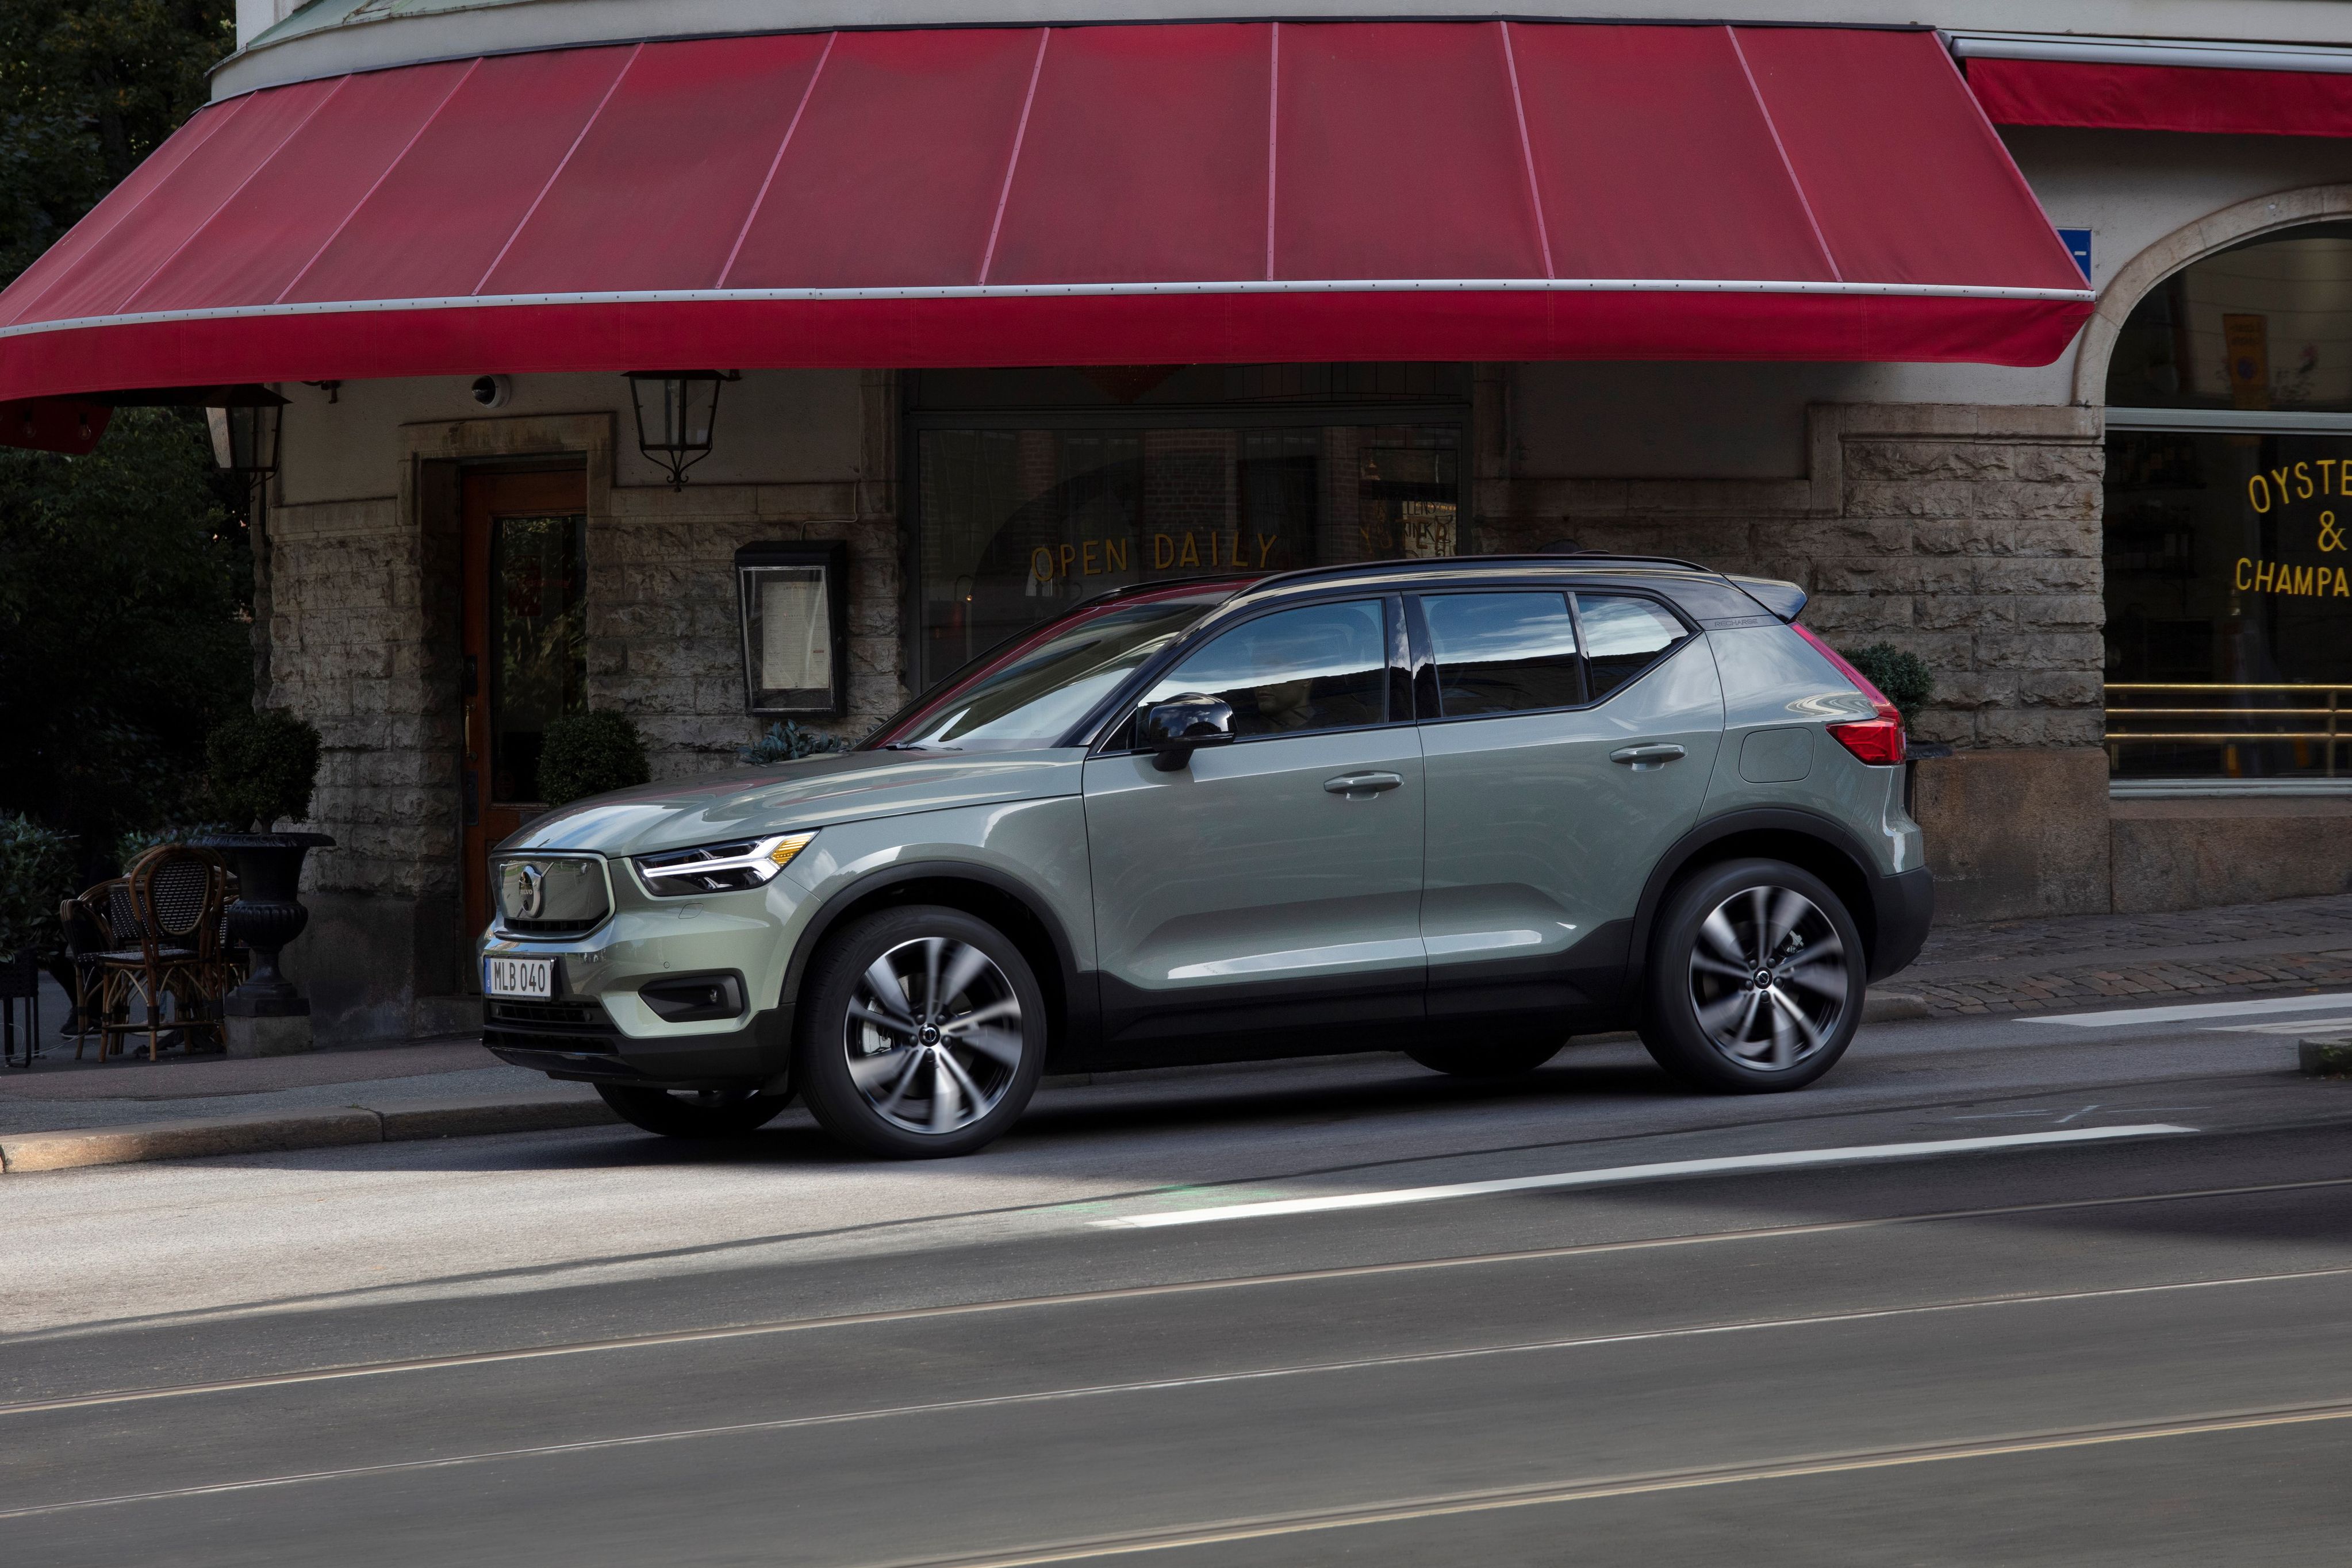 Volvo XC40 Recharge Electric Car : Price, Mileage, Images, Specs & Reviews  